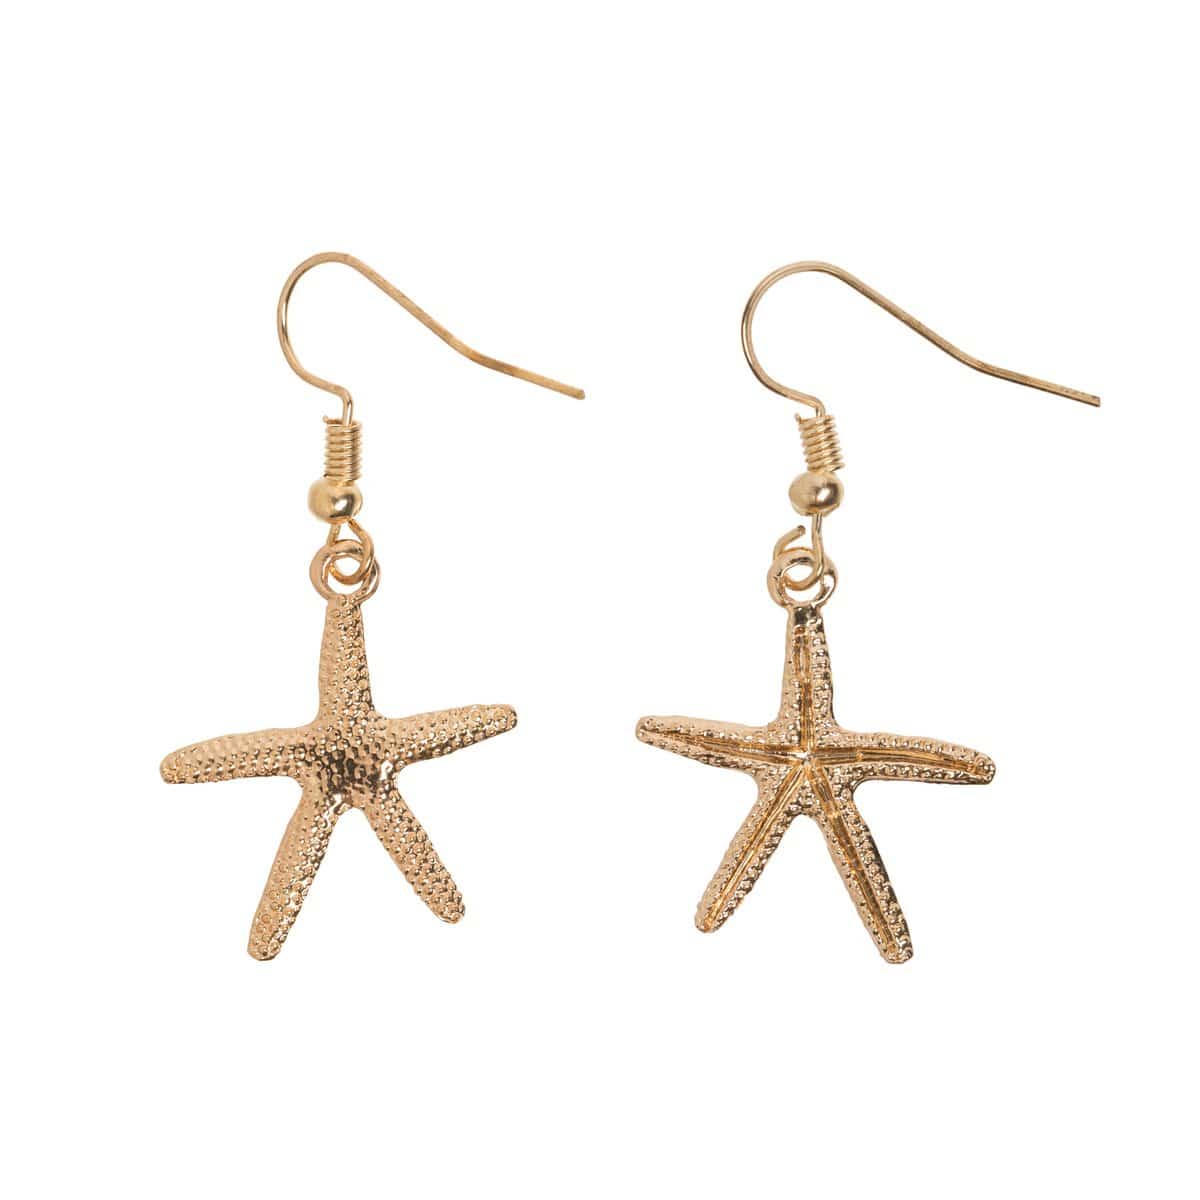 Deluxe Starfish Earring - Gold